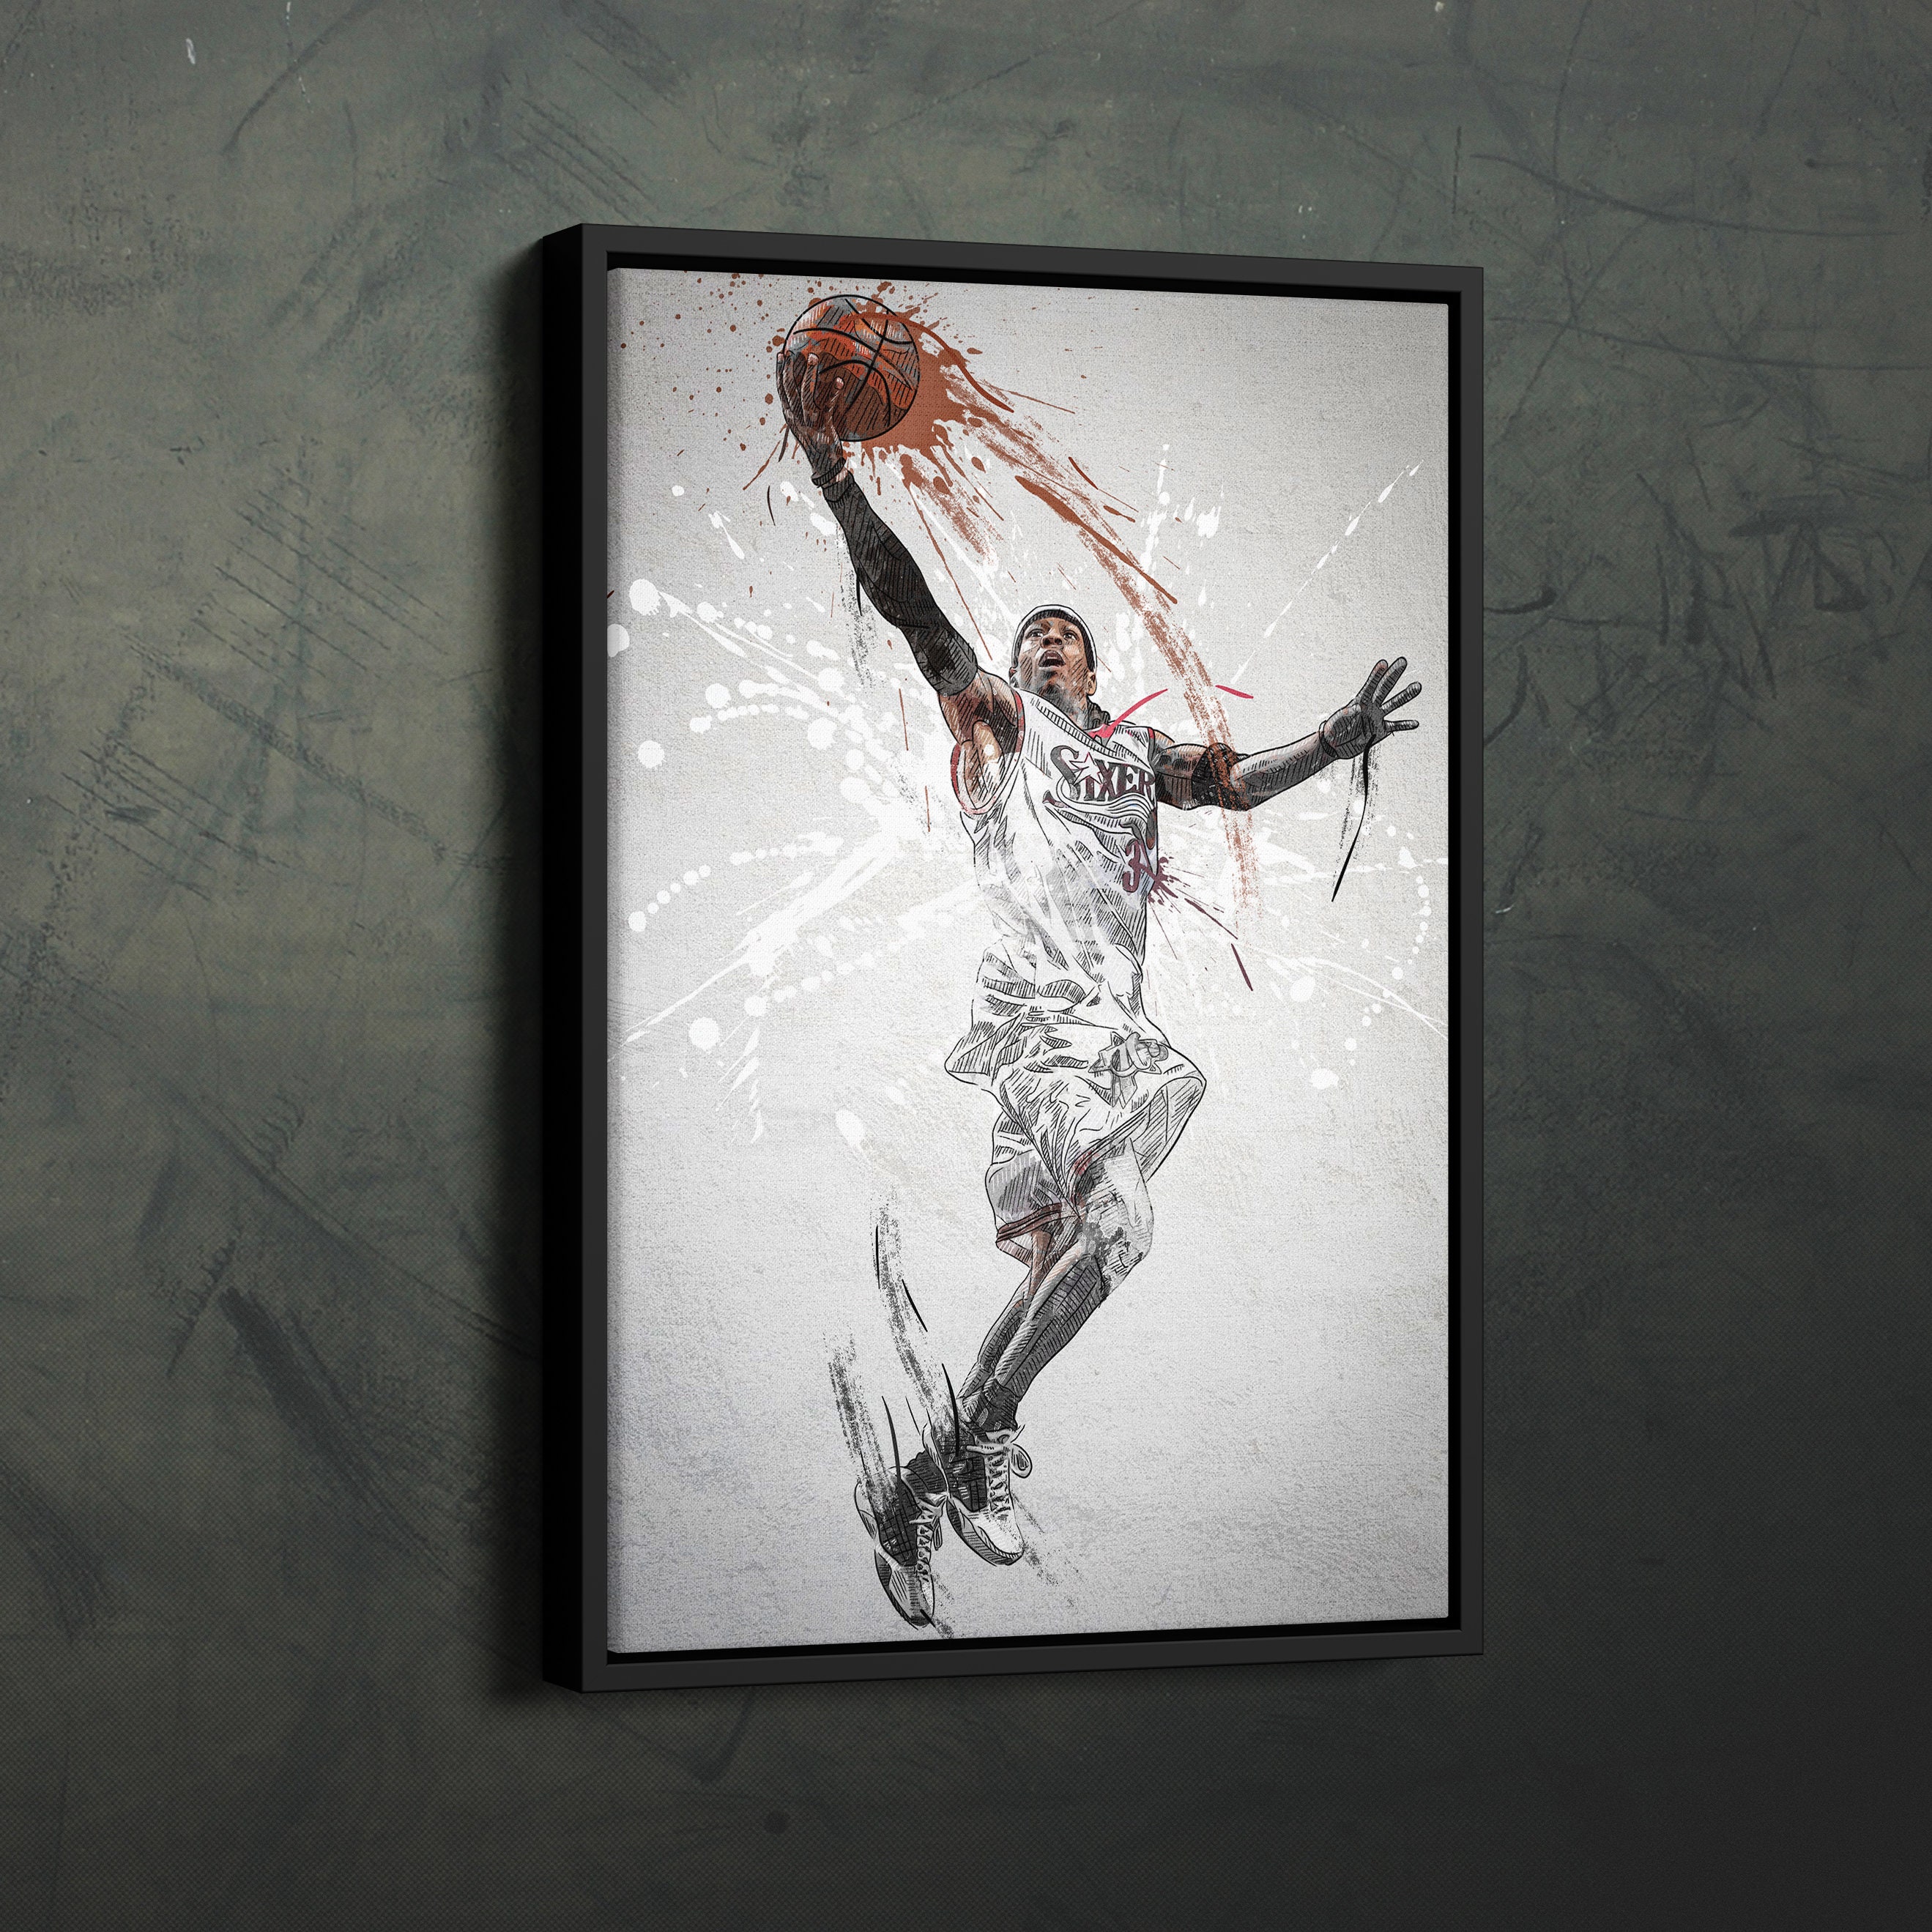 Allen Iverson Basketball Madness Celebrity Poster Canvas Poster Wall Art  Decor Print Picture Paintings for Living Room Bedroom Decoration Unframe